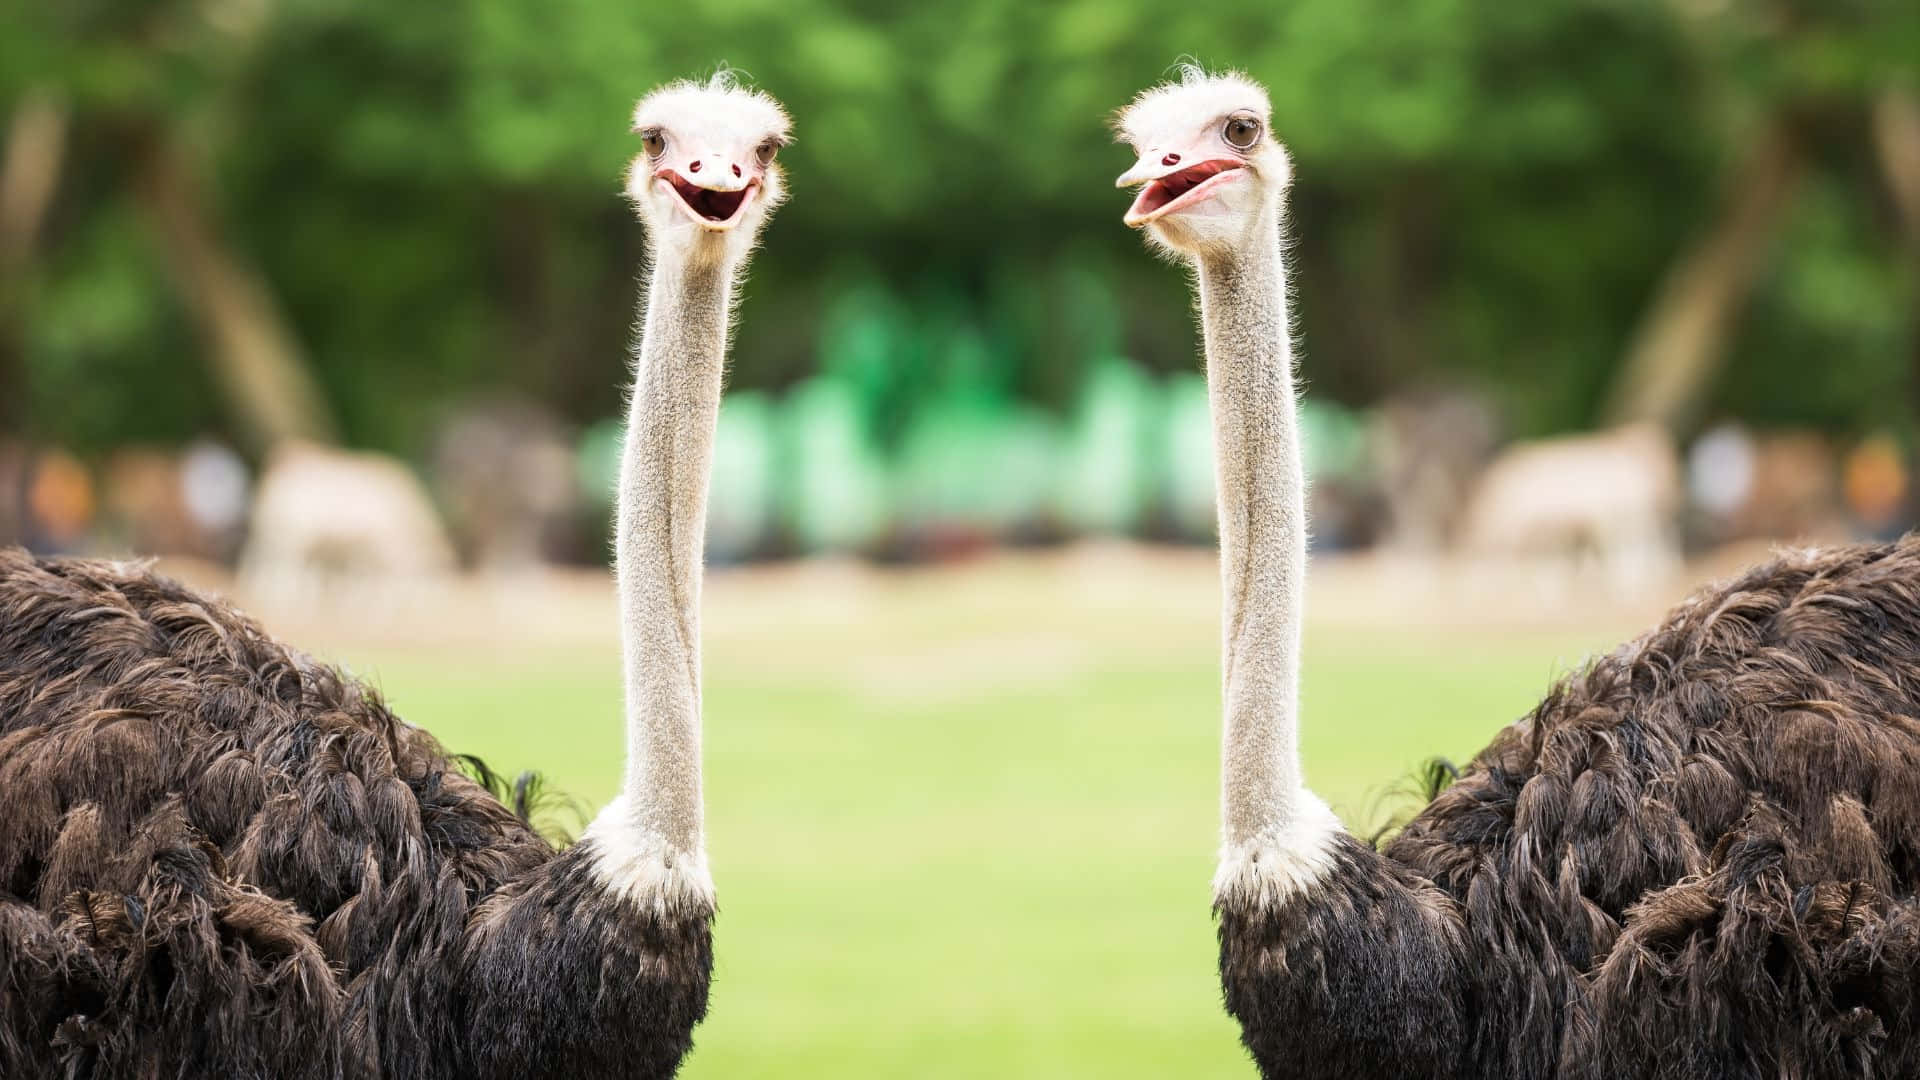 Twin Ostriches Standing Together Wallpaper